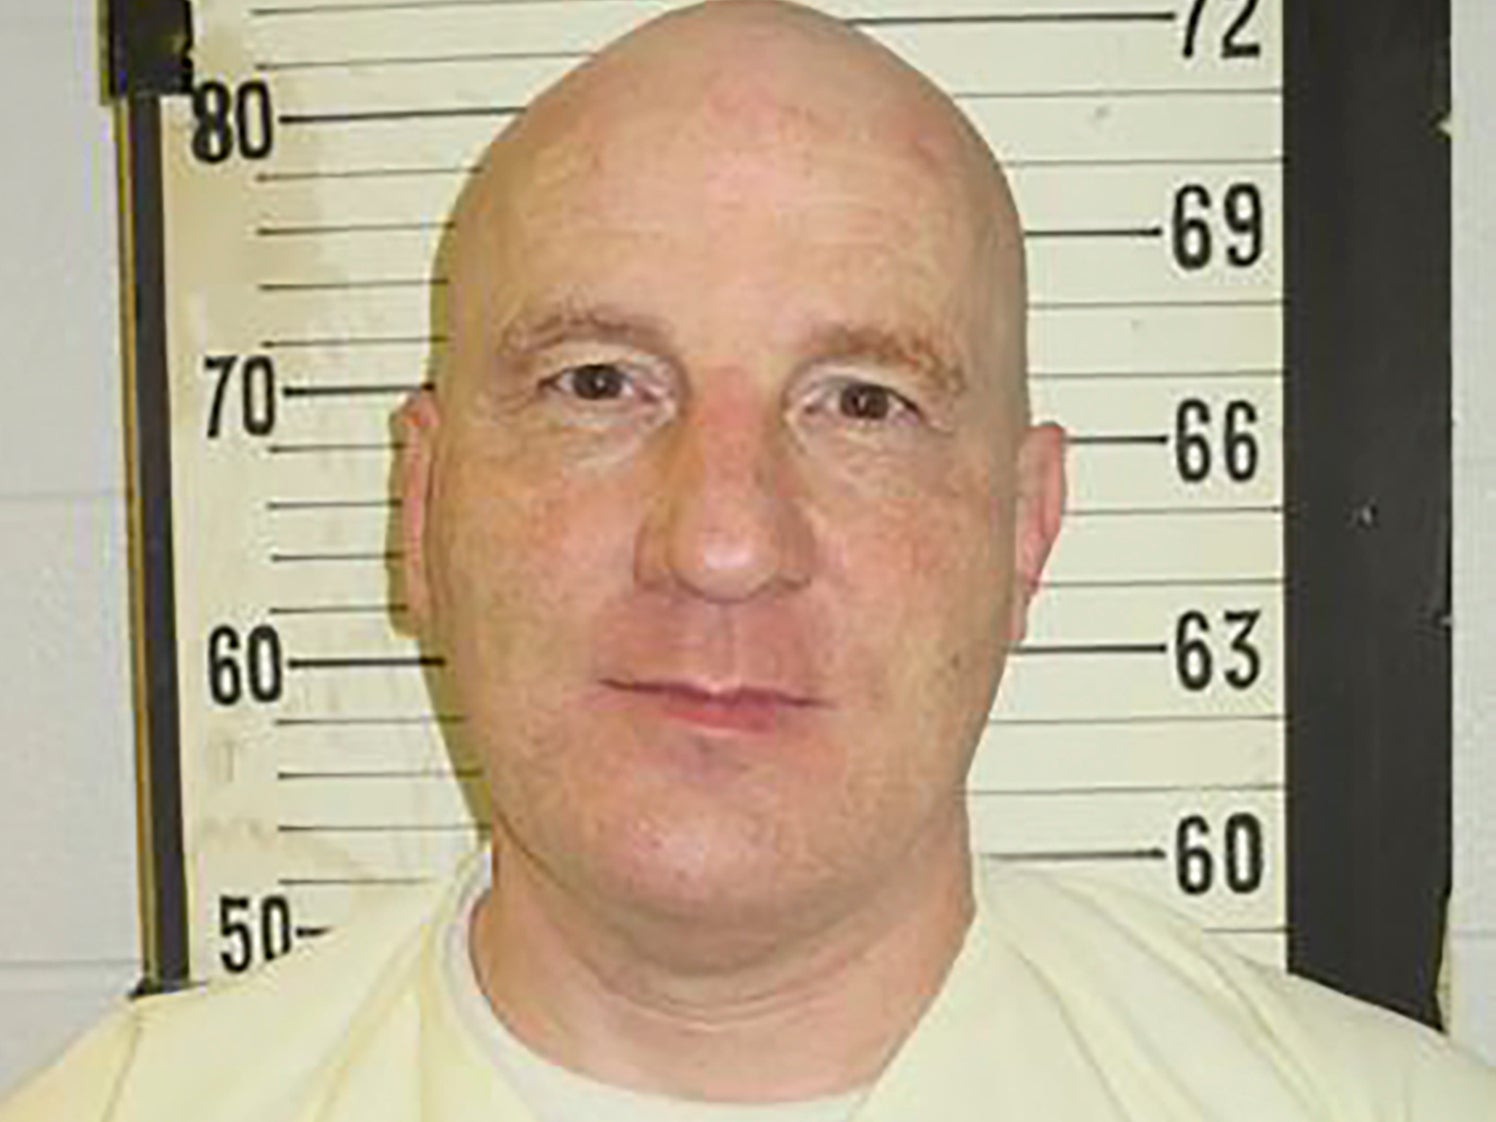 This photo provided by the Tennessee Department of Correction shows death row inmate Henry Hodges. Hodges cut off his own penis in a prison cell after slitting his wrists and asking to be put on suicide watch, his attorney Kelley Henry said on Thursday, Oct. 27, 2022. (Tennessee Department of Correction via AP)